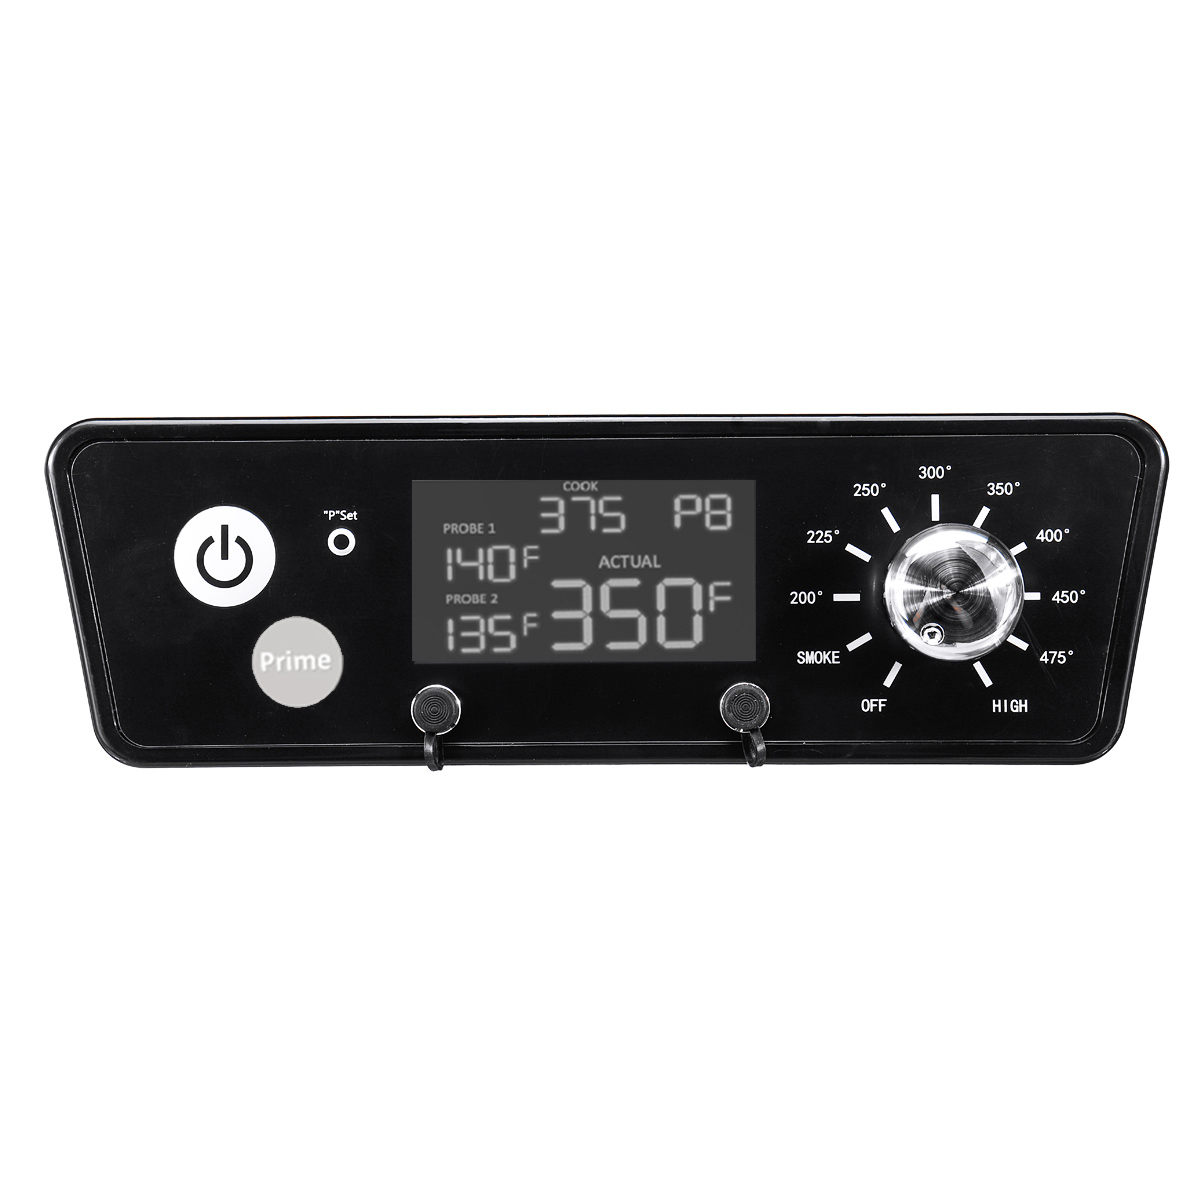 120V P7-340 Digital Thermometer Thermostat Controller Board LCD Display  For PIT Boss Wood Oven